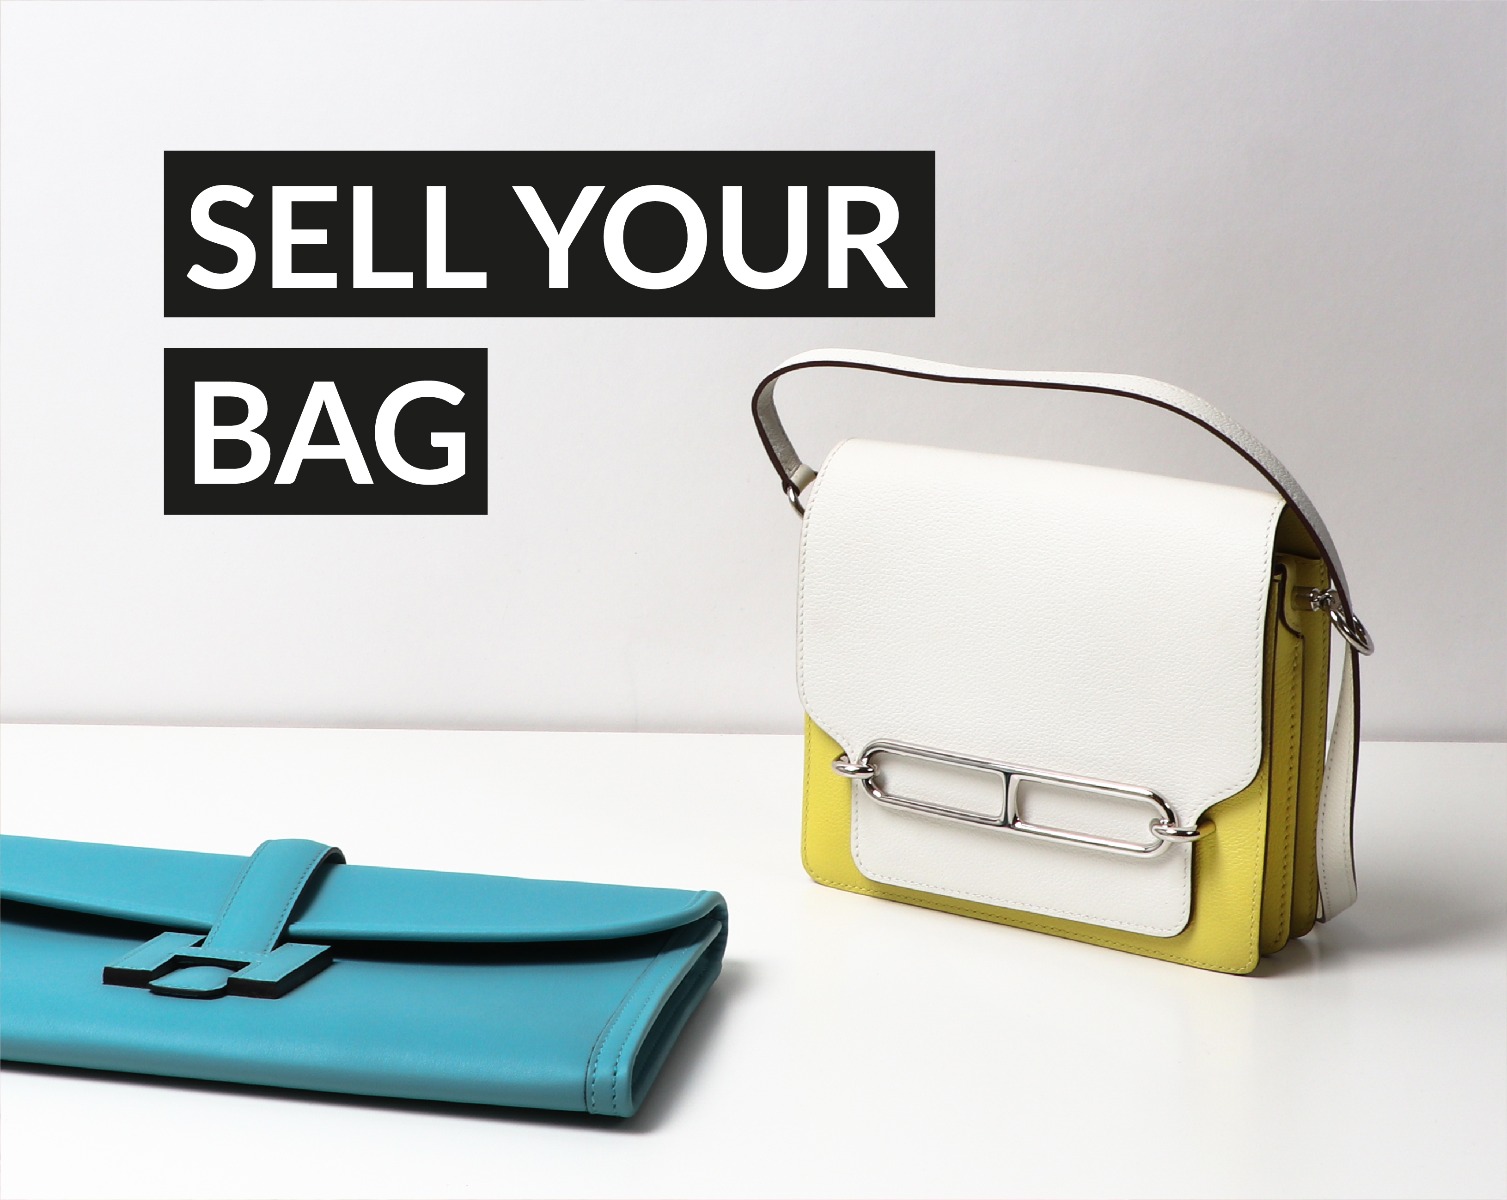 Sell your bag